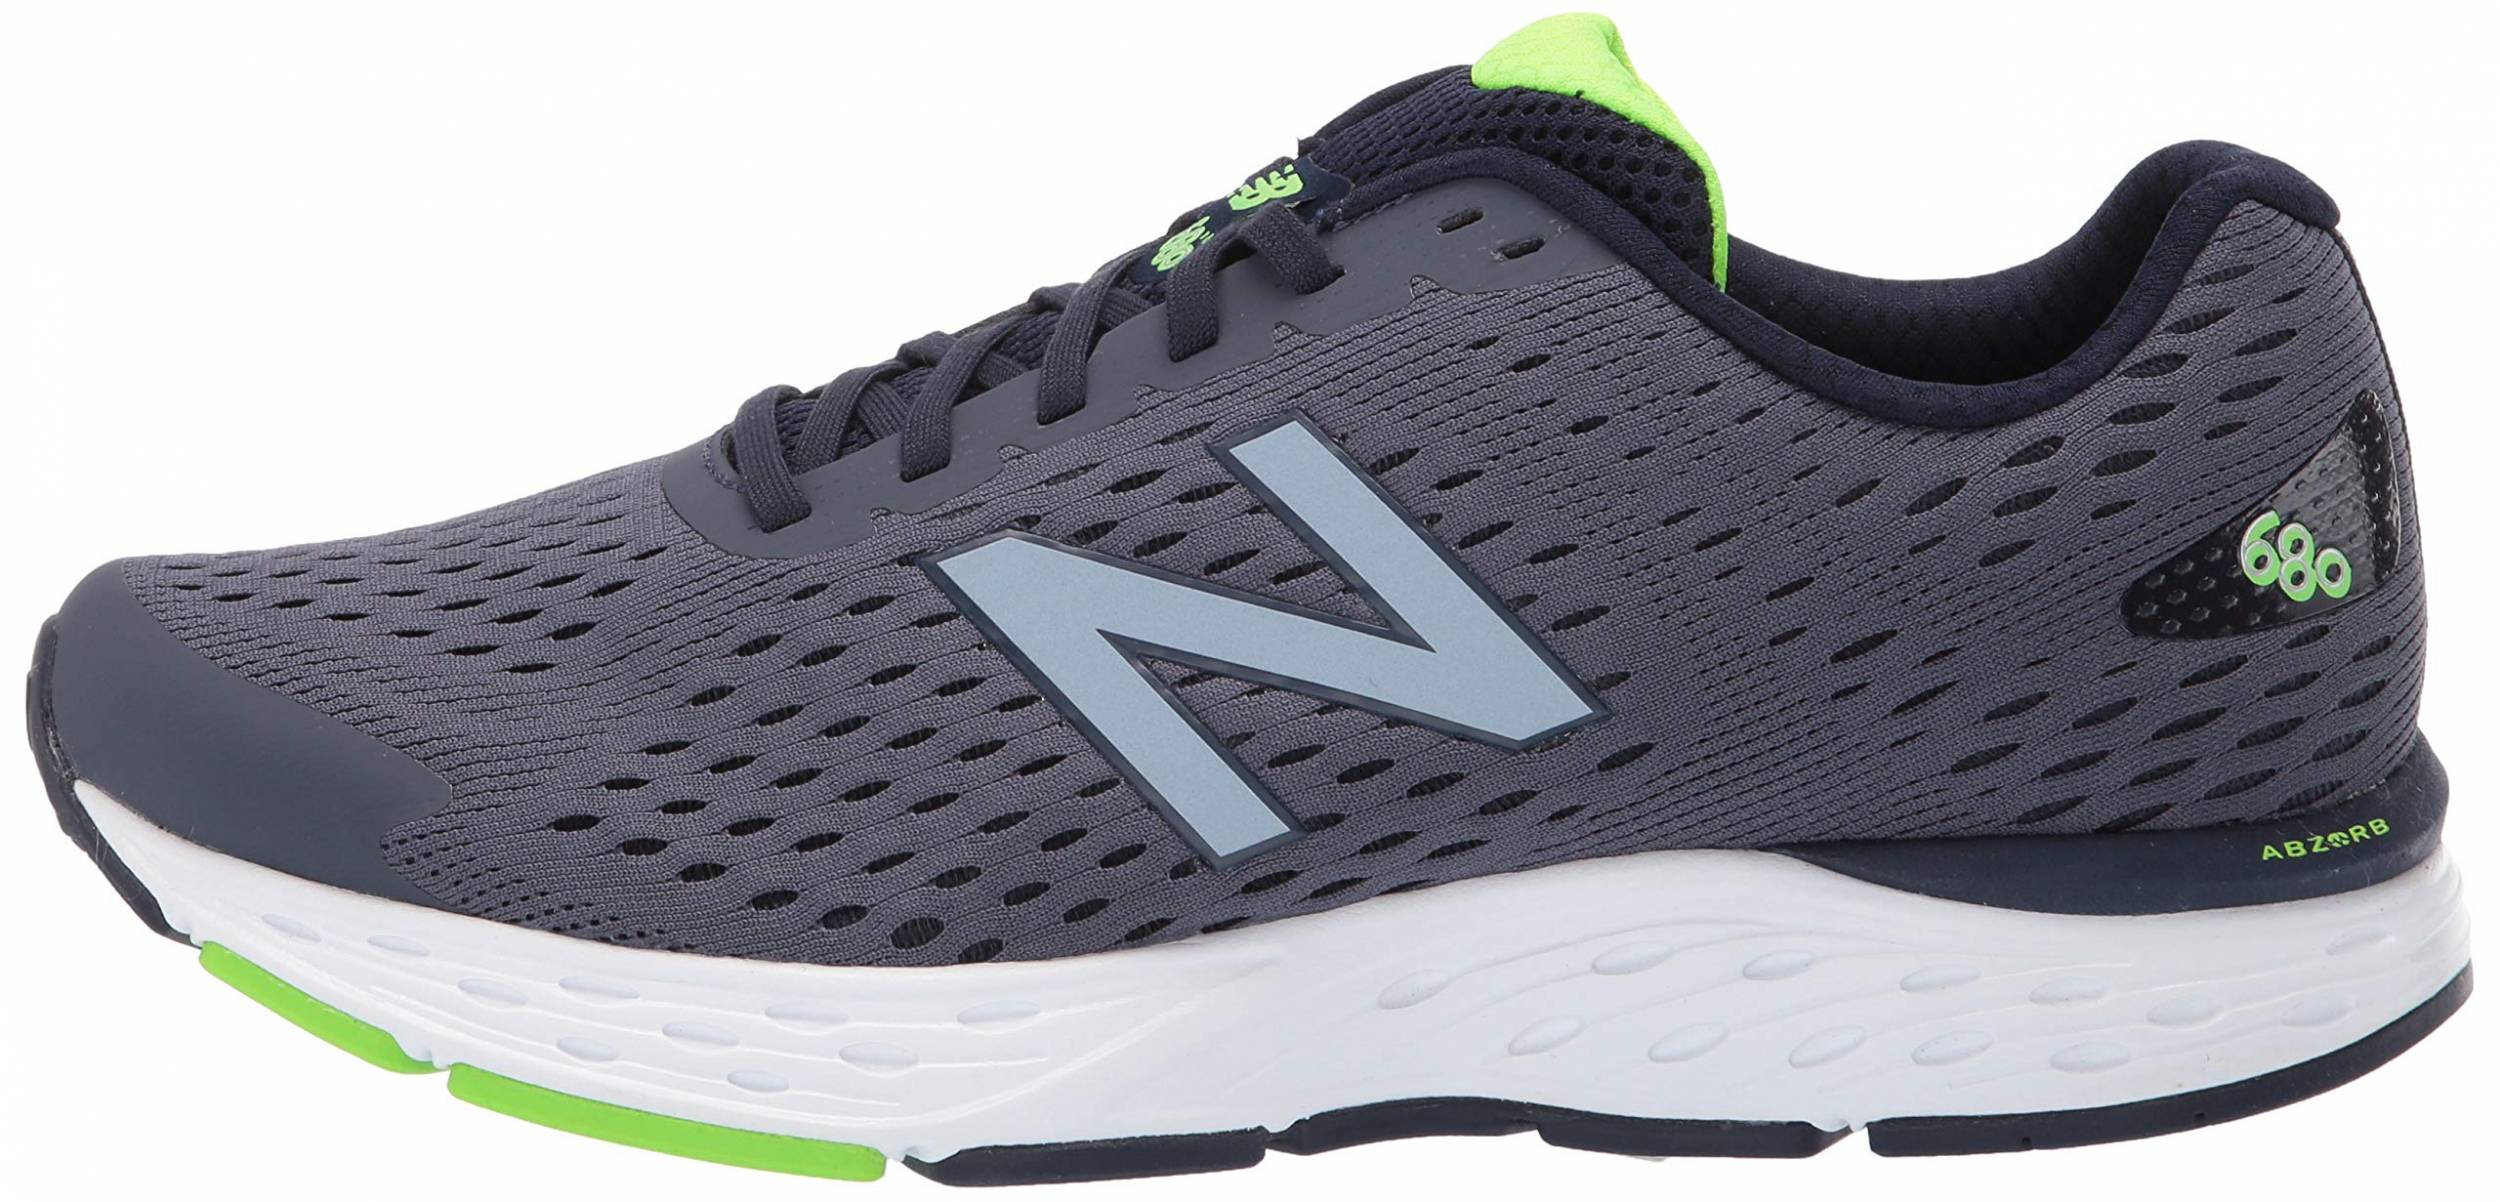 New Balance 86 D Width Online Hotsell, UP TO 56% OFF